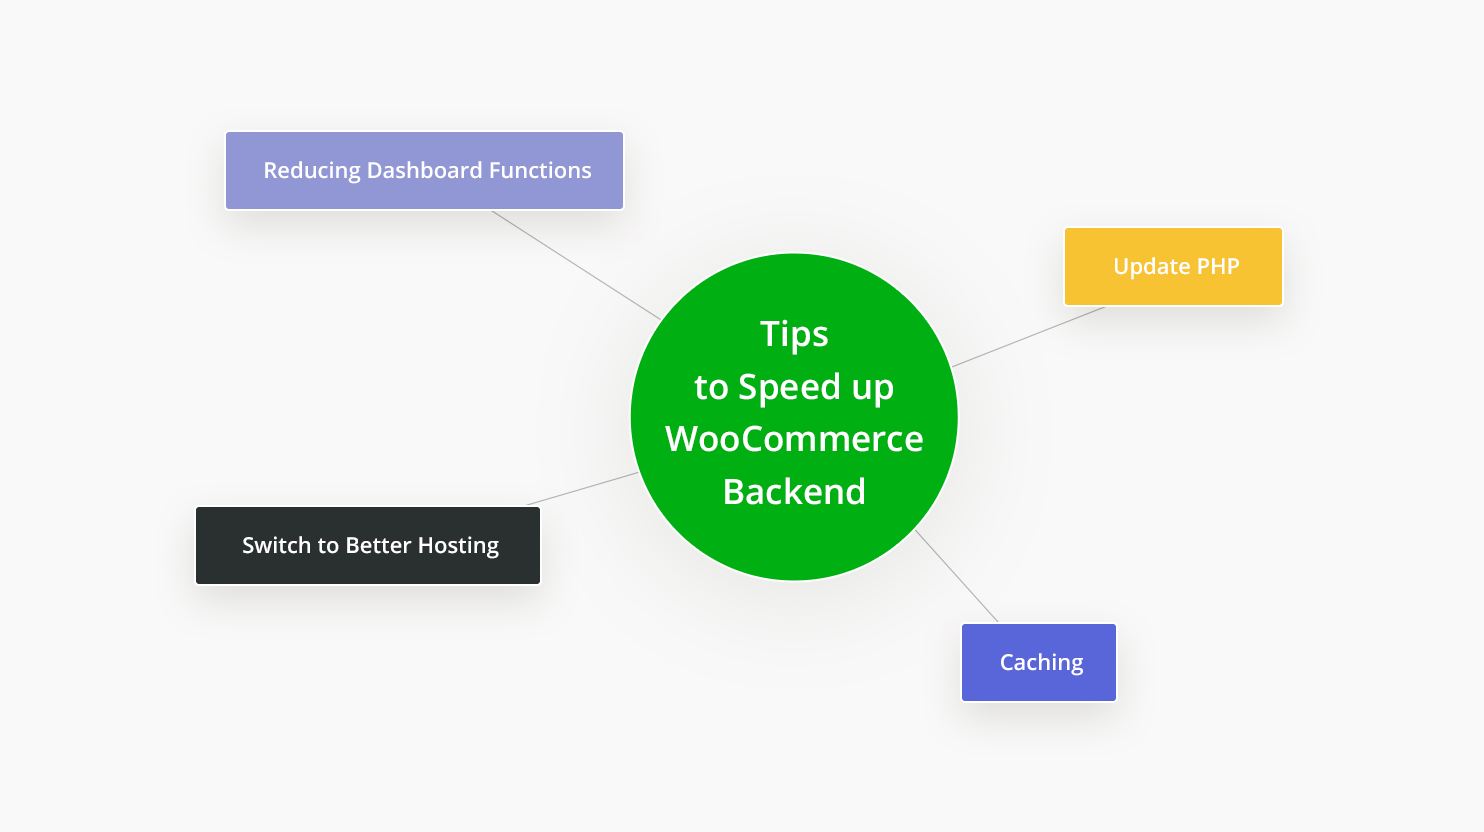 Tips to speed up WooCommerce backend